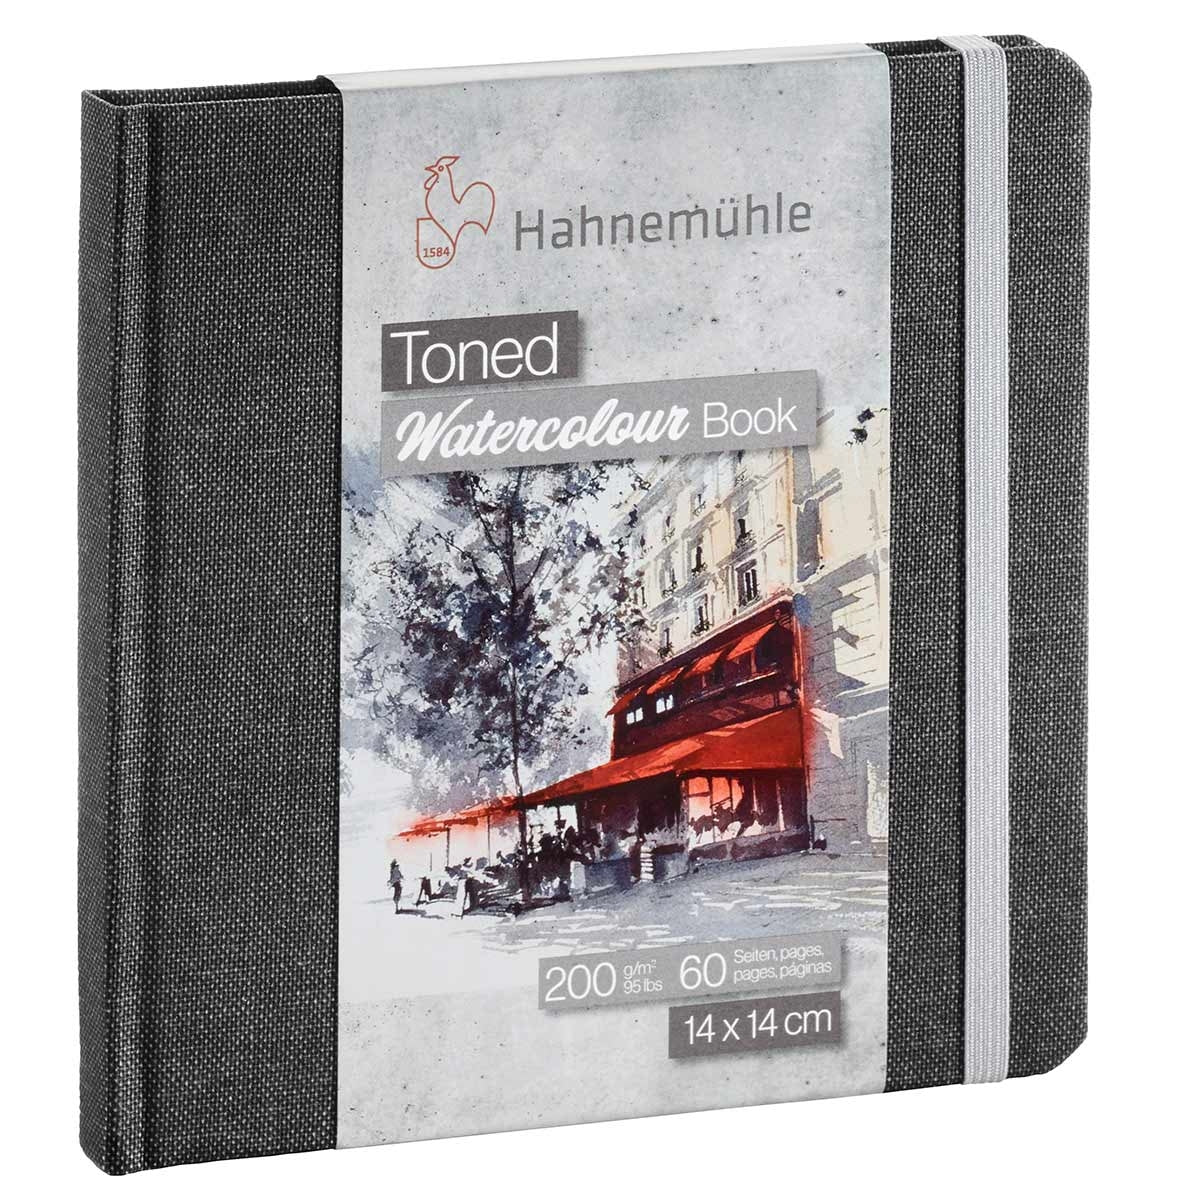 Hahnemuhle - Toned Watercolour Books - Grey 14x cm Square